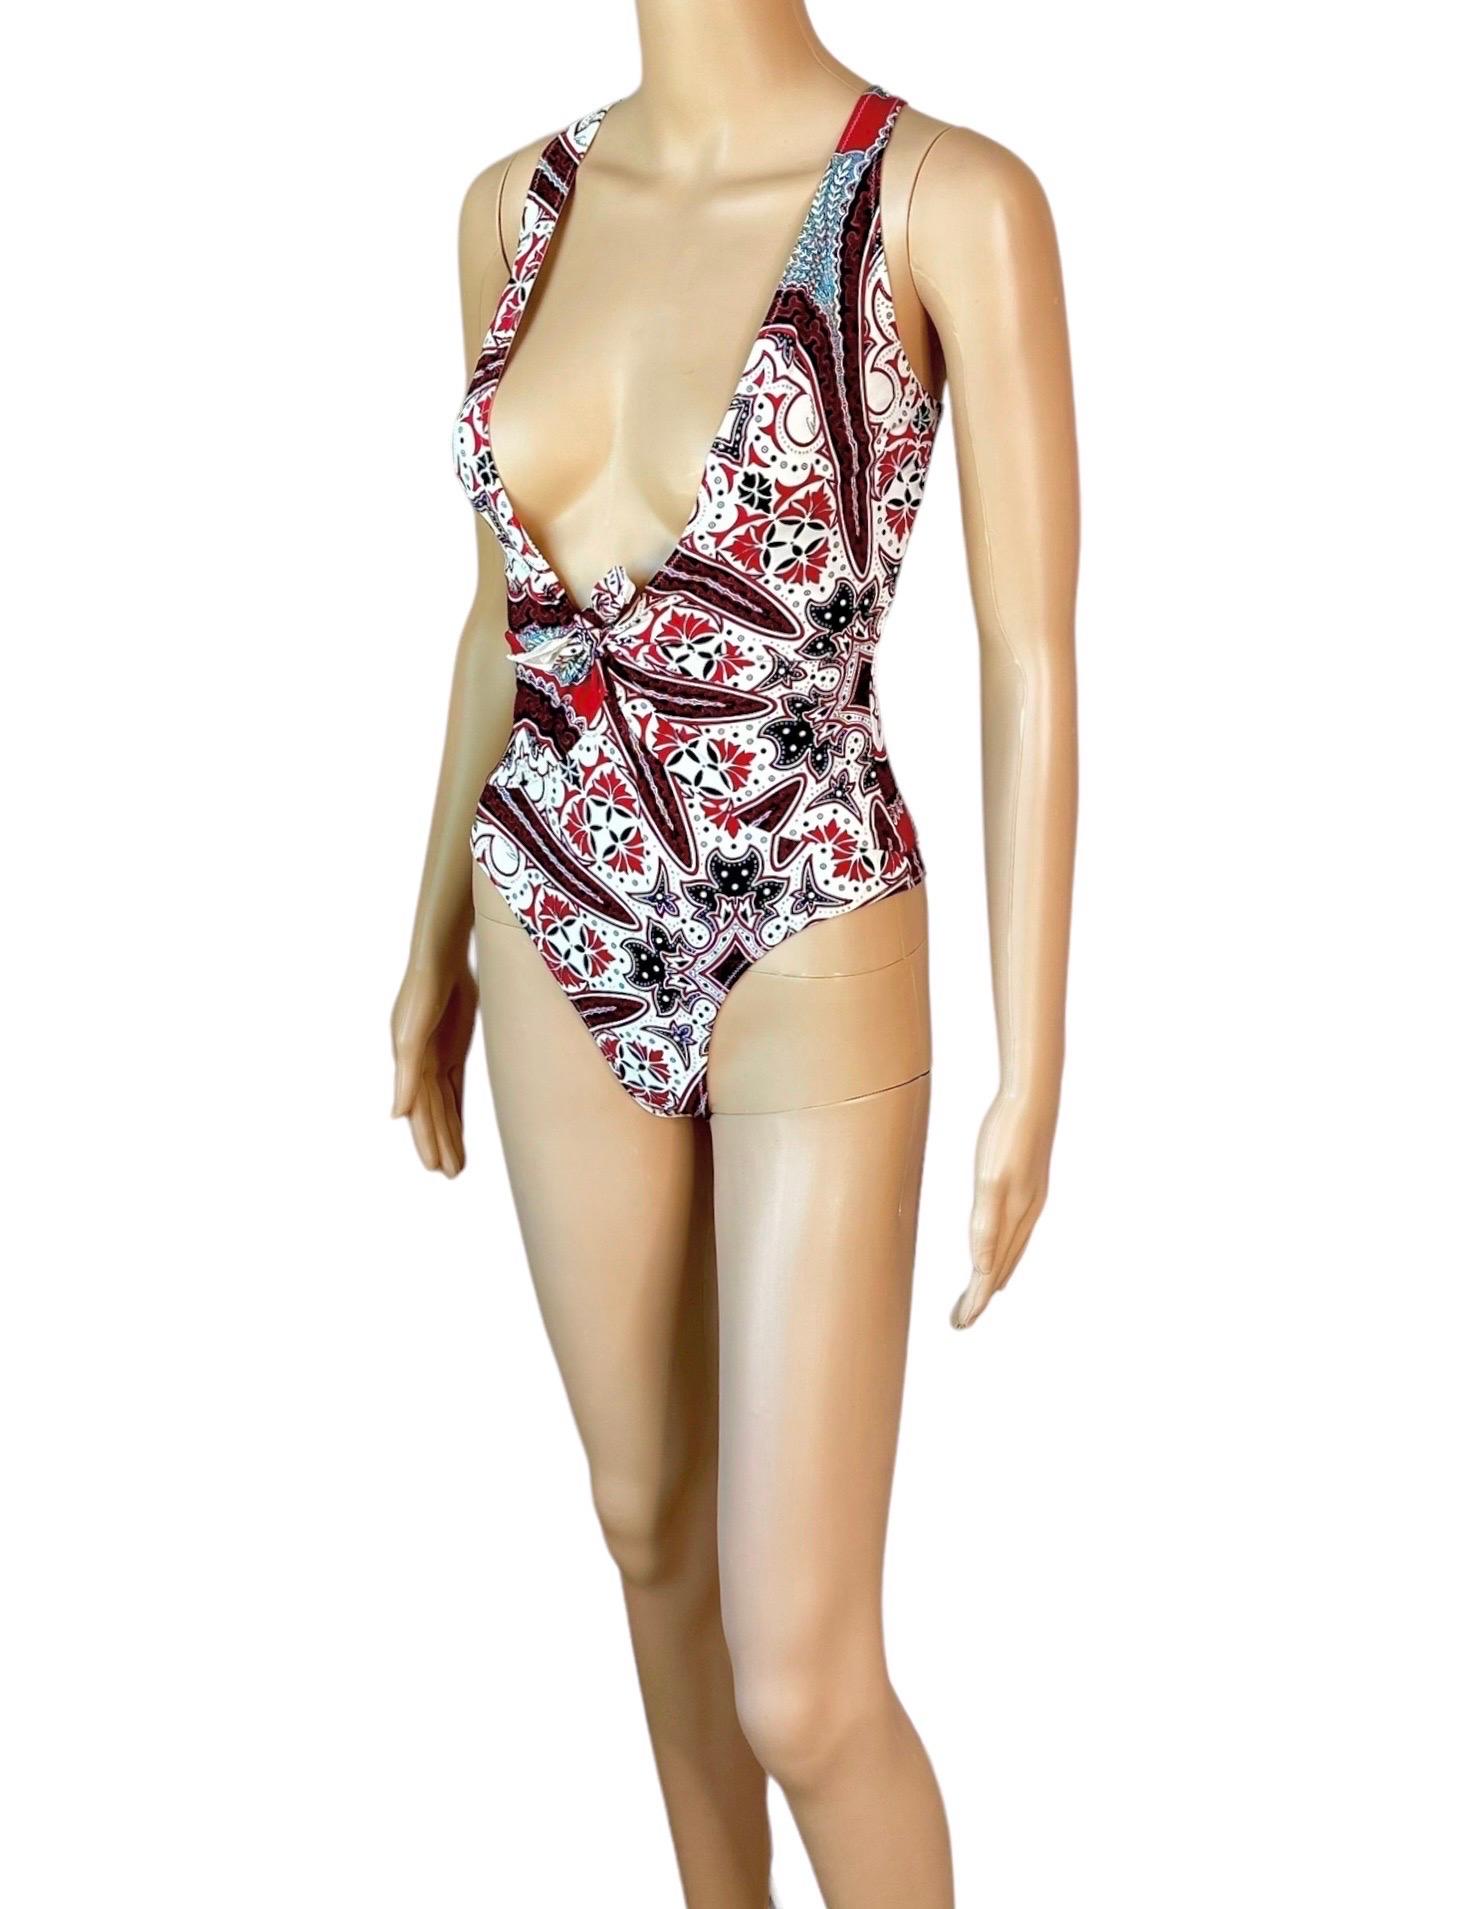 Tom Ford for Gucci Cruise 2004 Unworn One Piece Bodysuit Swimsuit Swimwear  For Sale 5